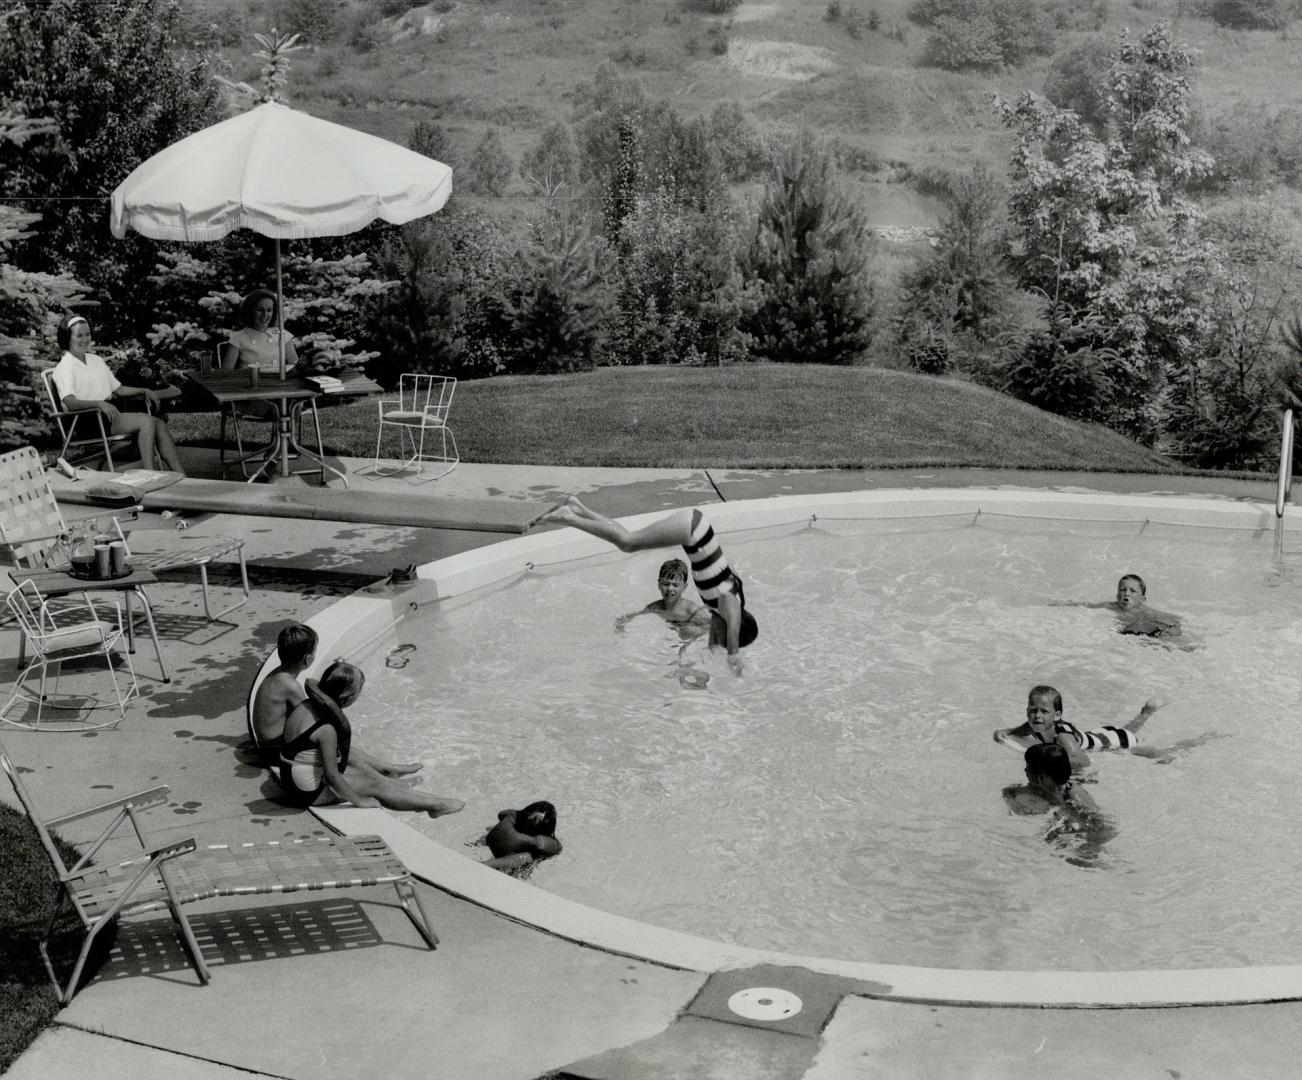 Summer in the city, what better way to enjoy it than with a pool in your back yard like the Robert Mitchells?